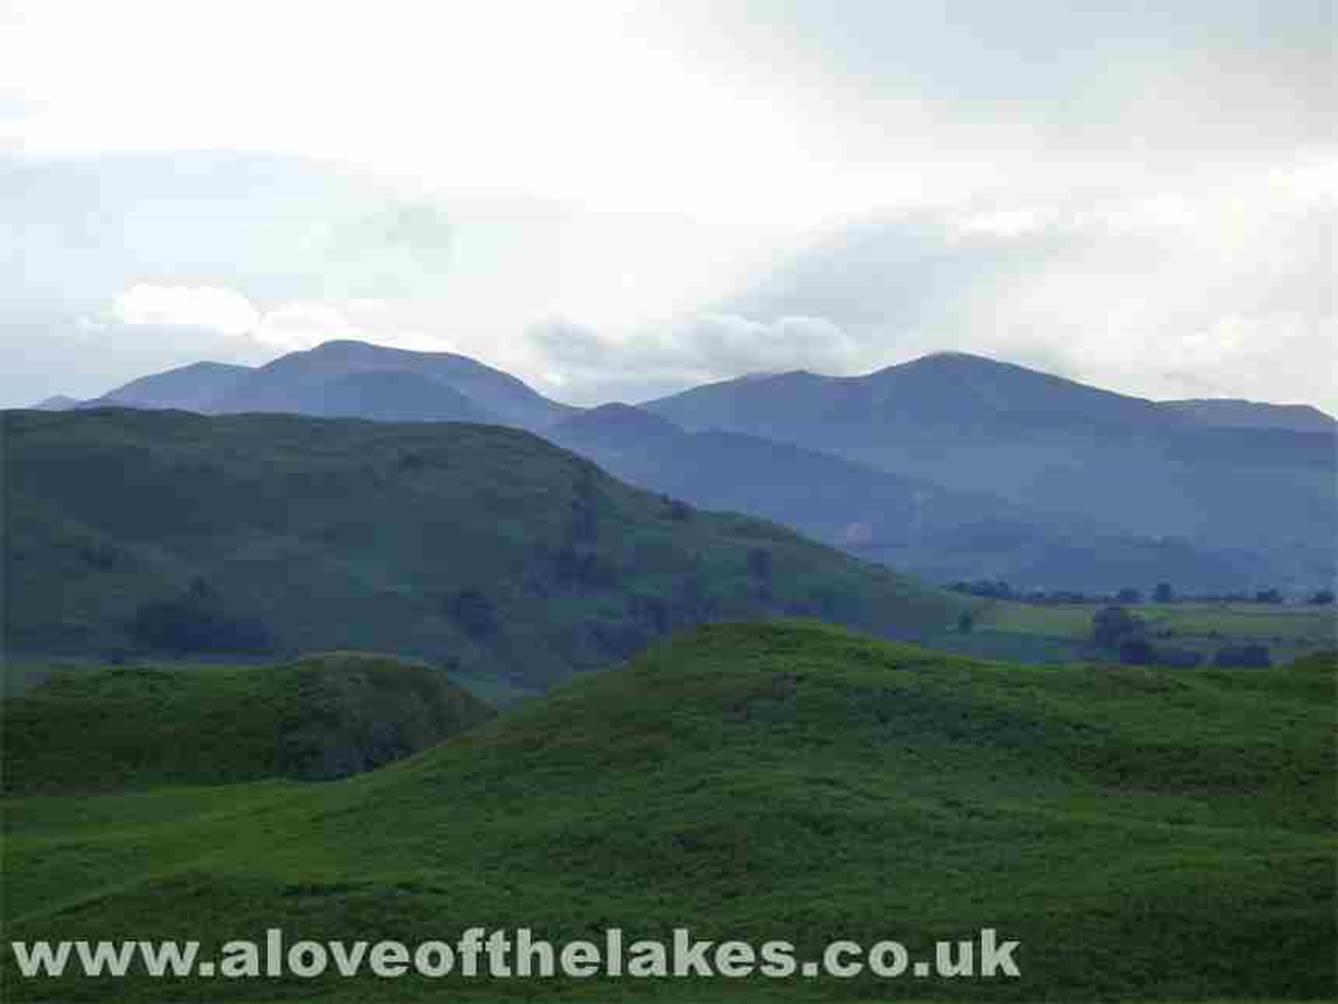 Looking over to Grizedale Pike and the fells around Derwent Water